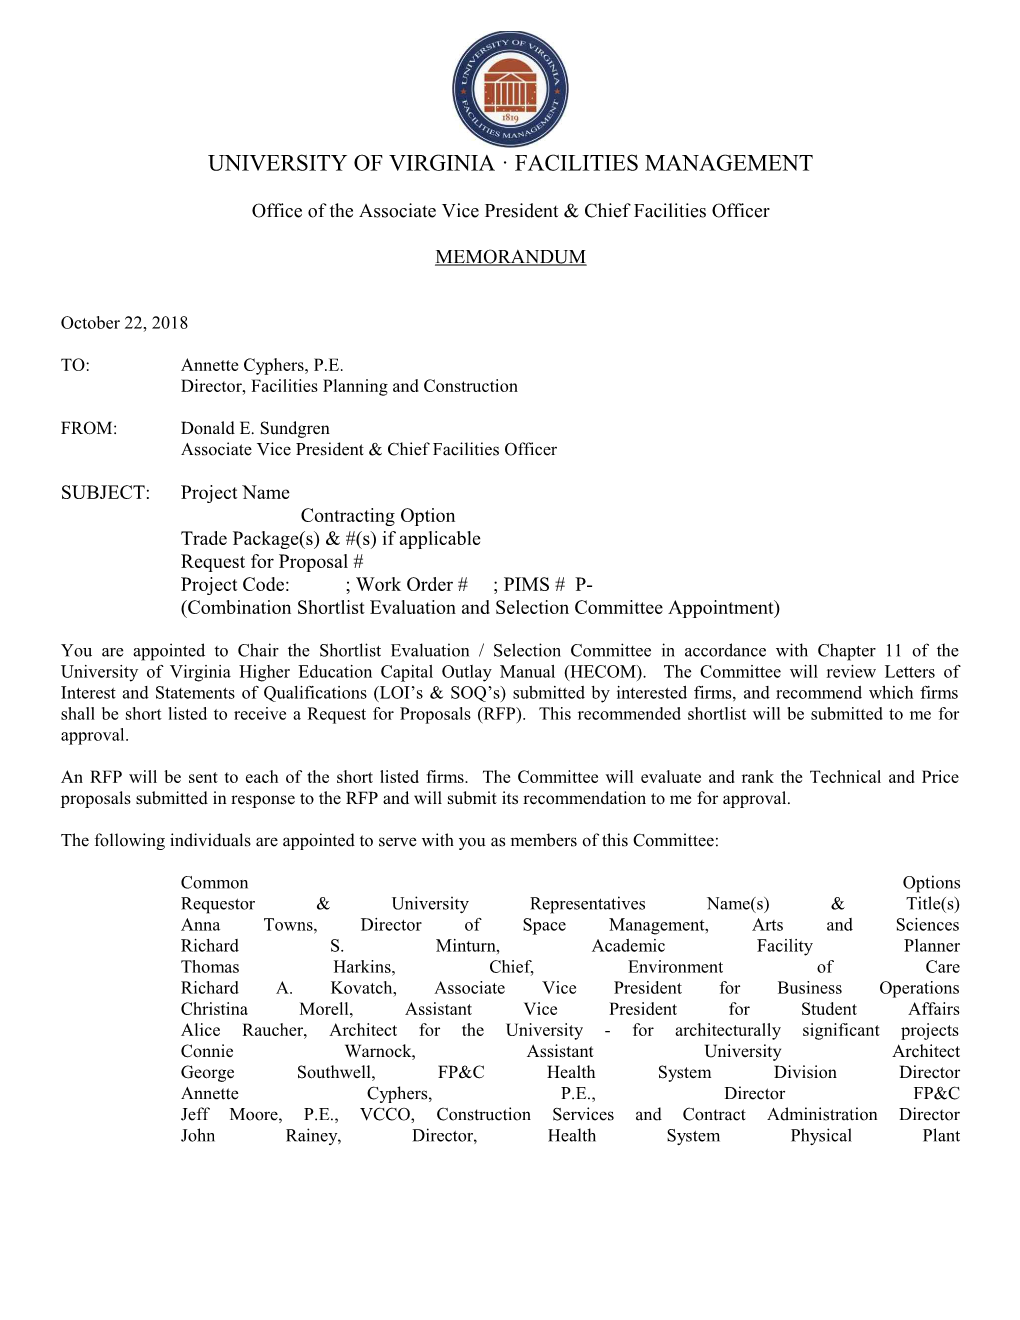 Evaluatoin Committee Appointment Letter